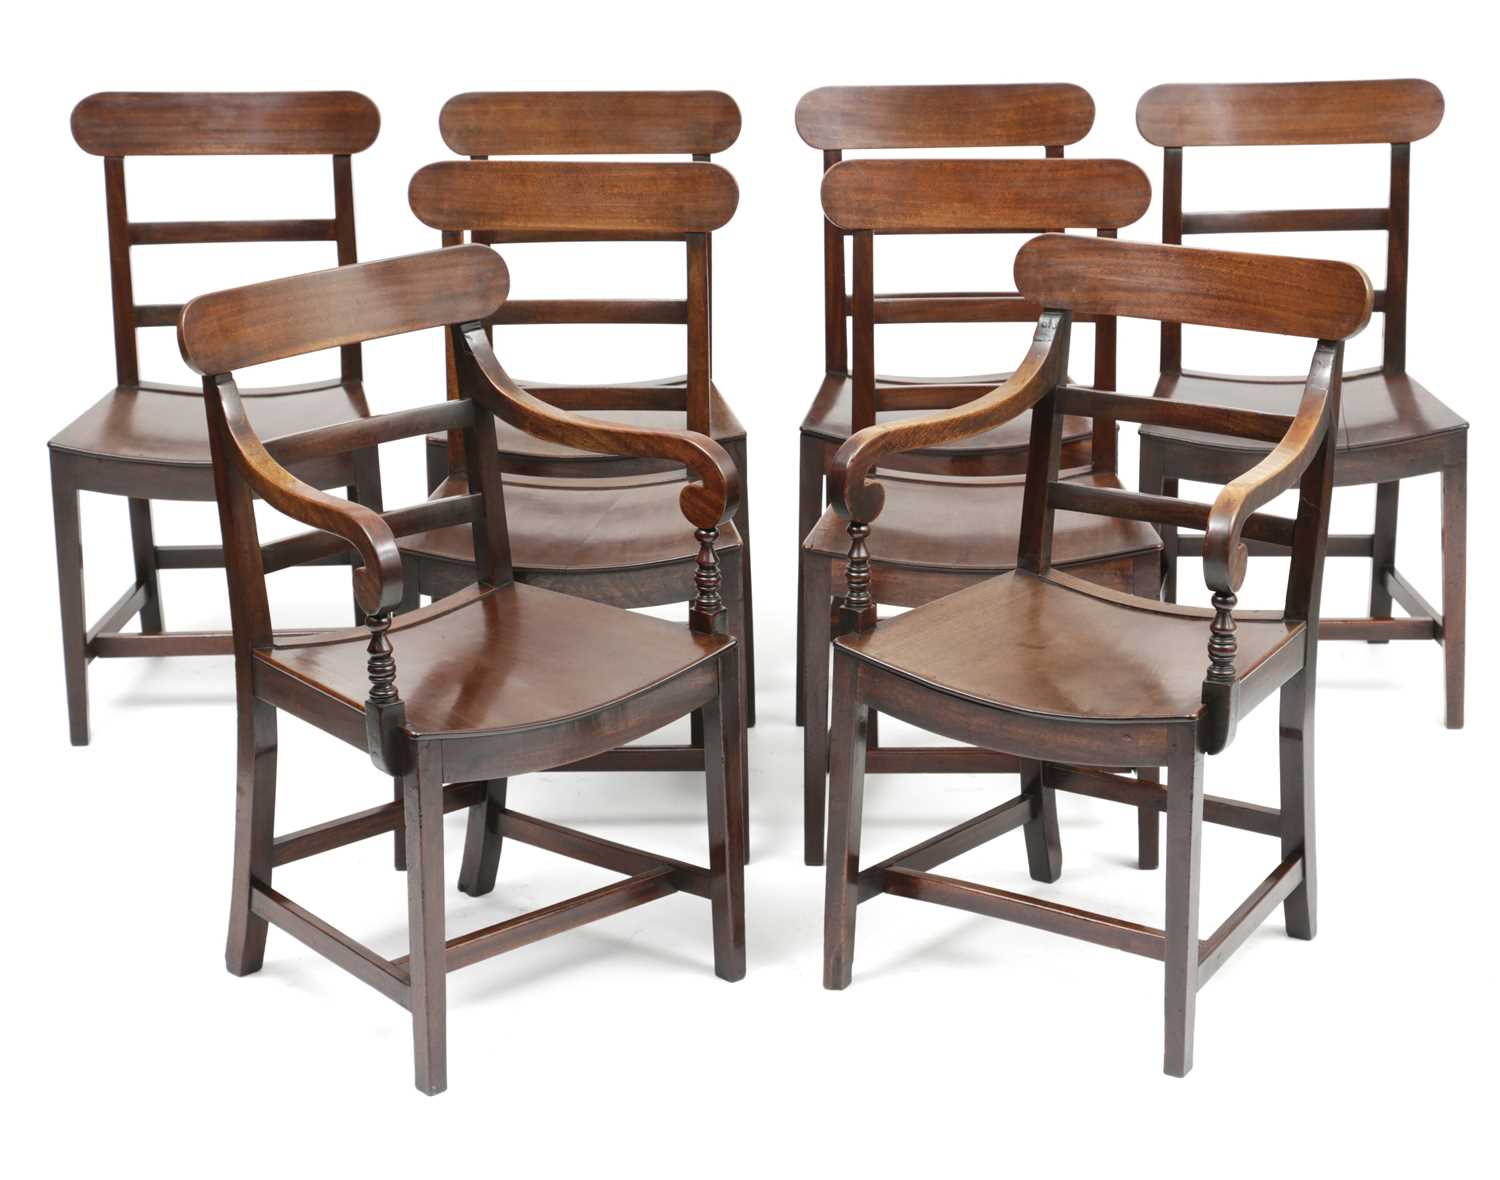 A SET OF EIGHT REGENCY MAHOGANY COUNTRY DINING CHAIRS EAST ANGLIAN, EARLY 19TH CENTURY each with a